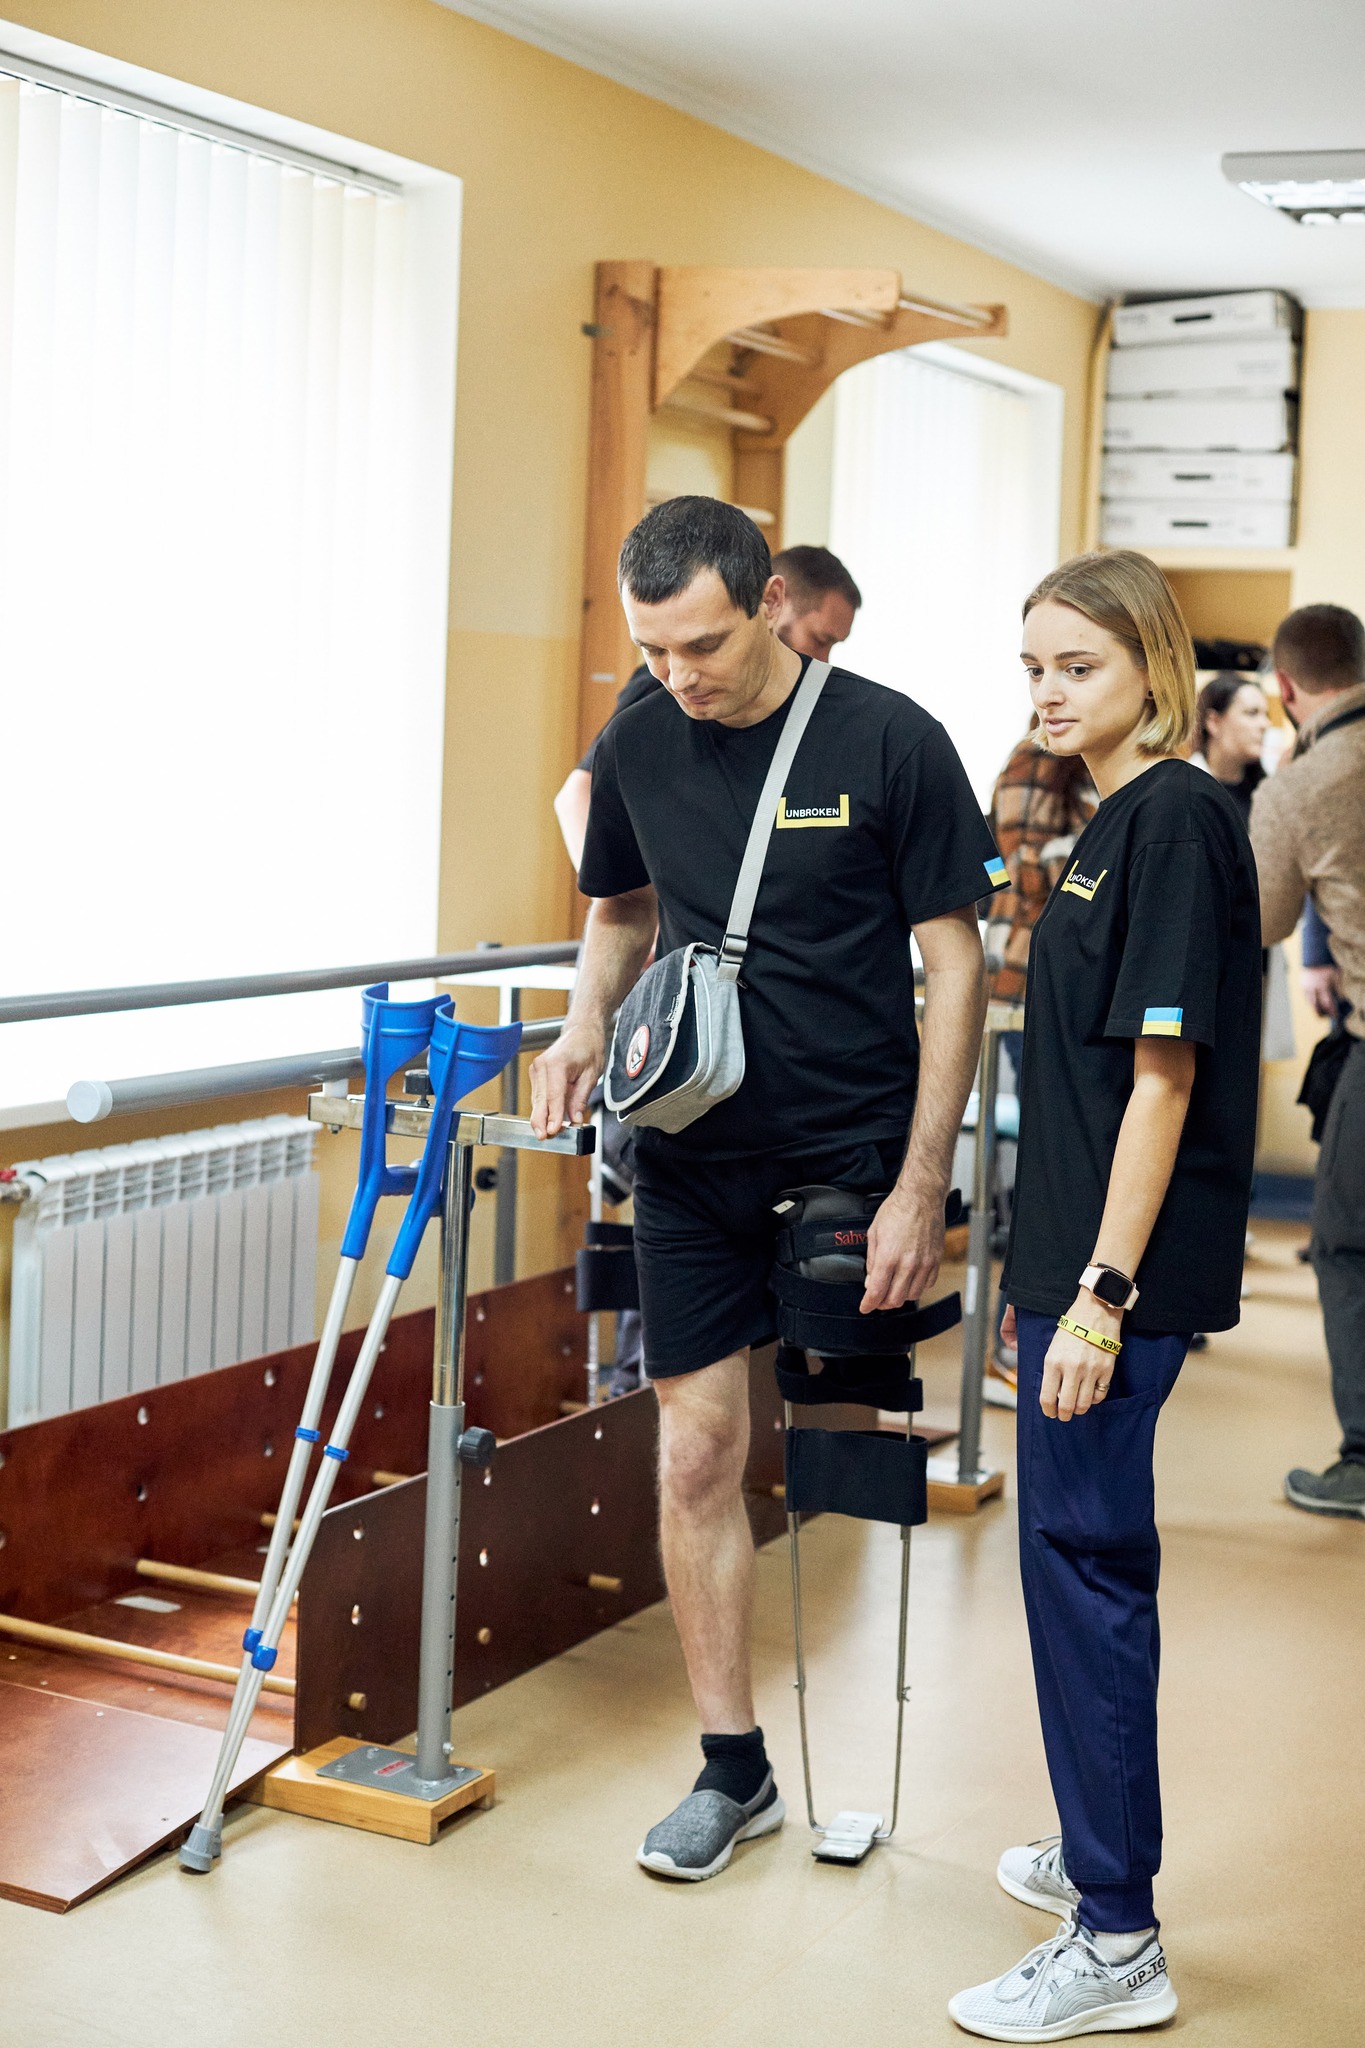 Ukraine: Prostheses Laboratory for War Wounded